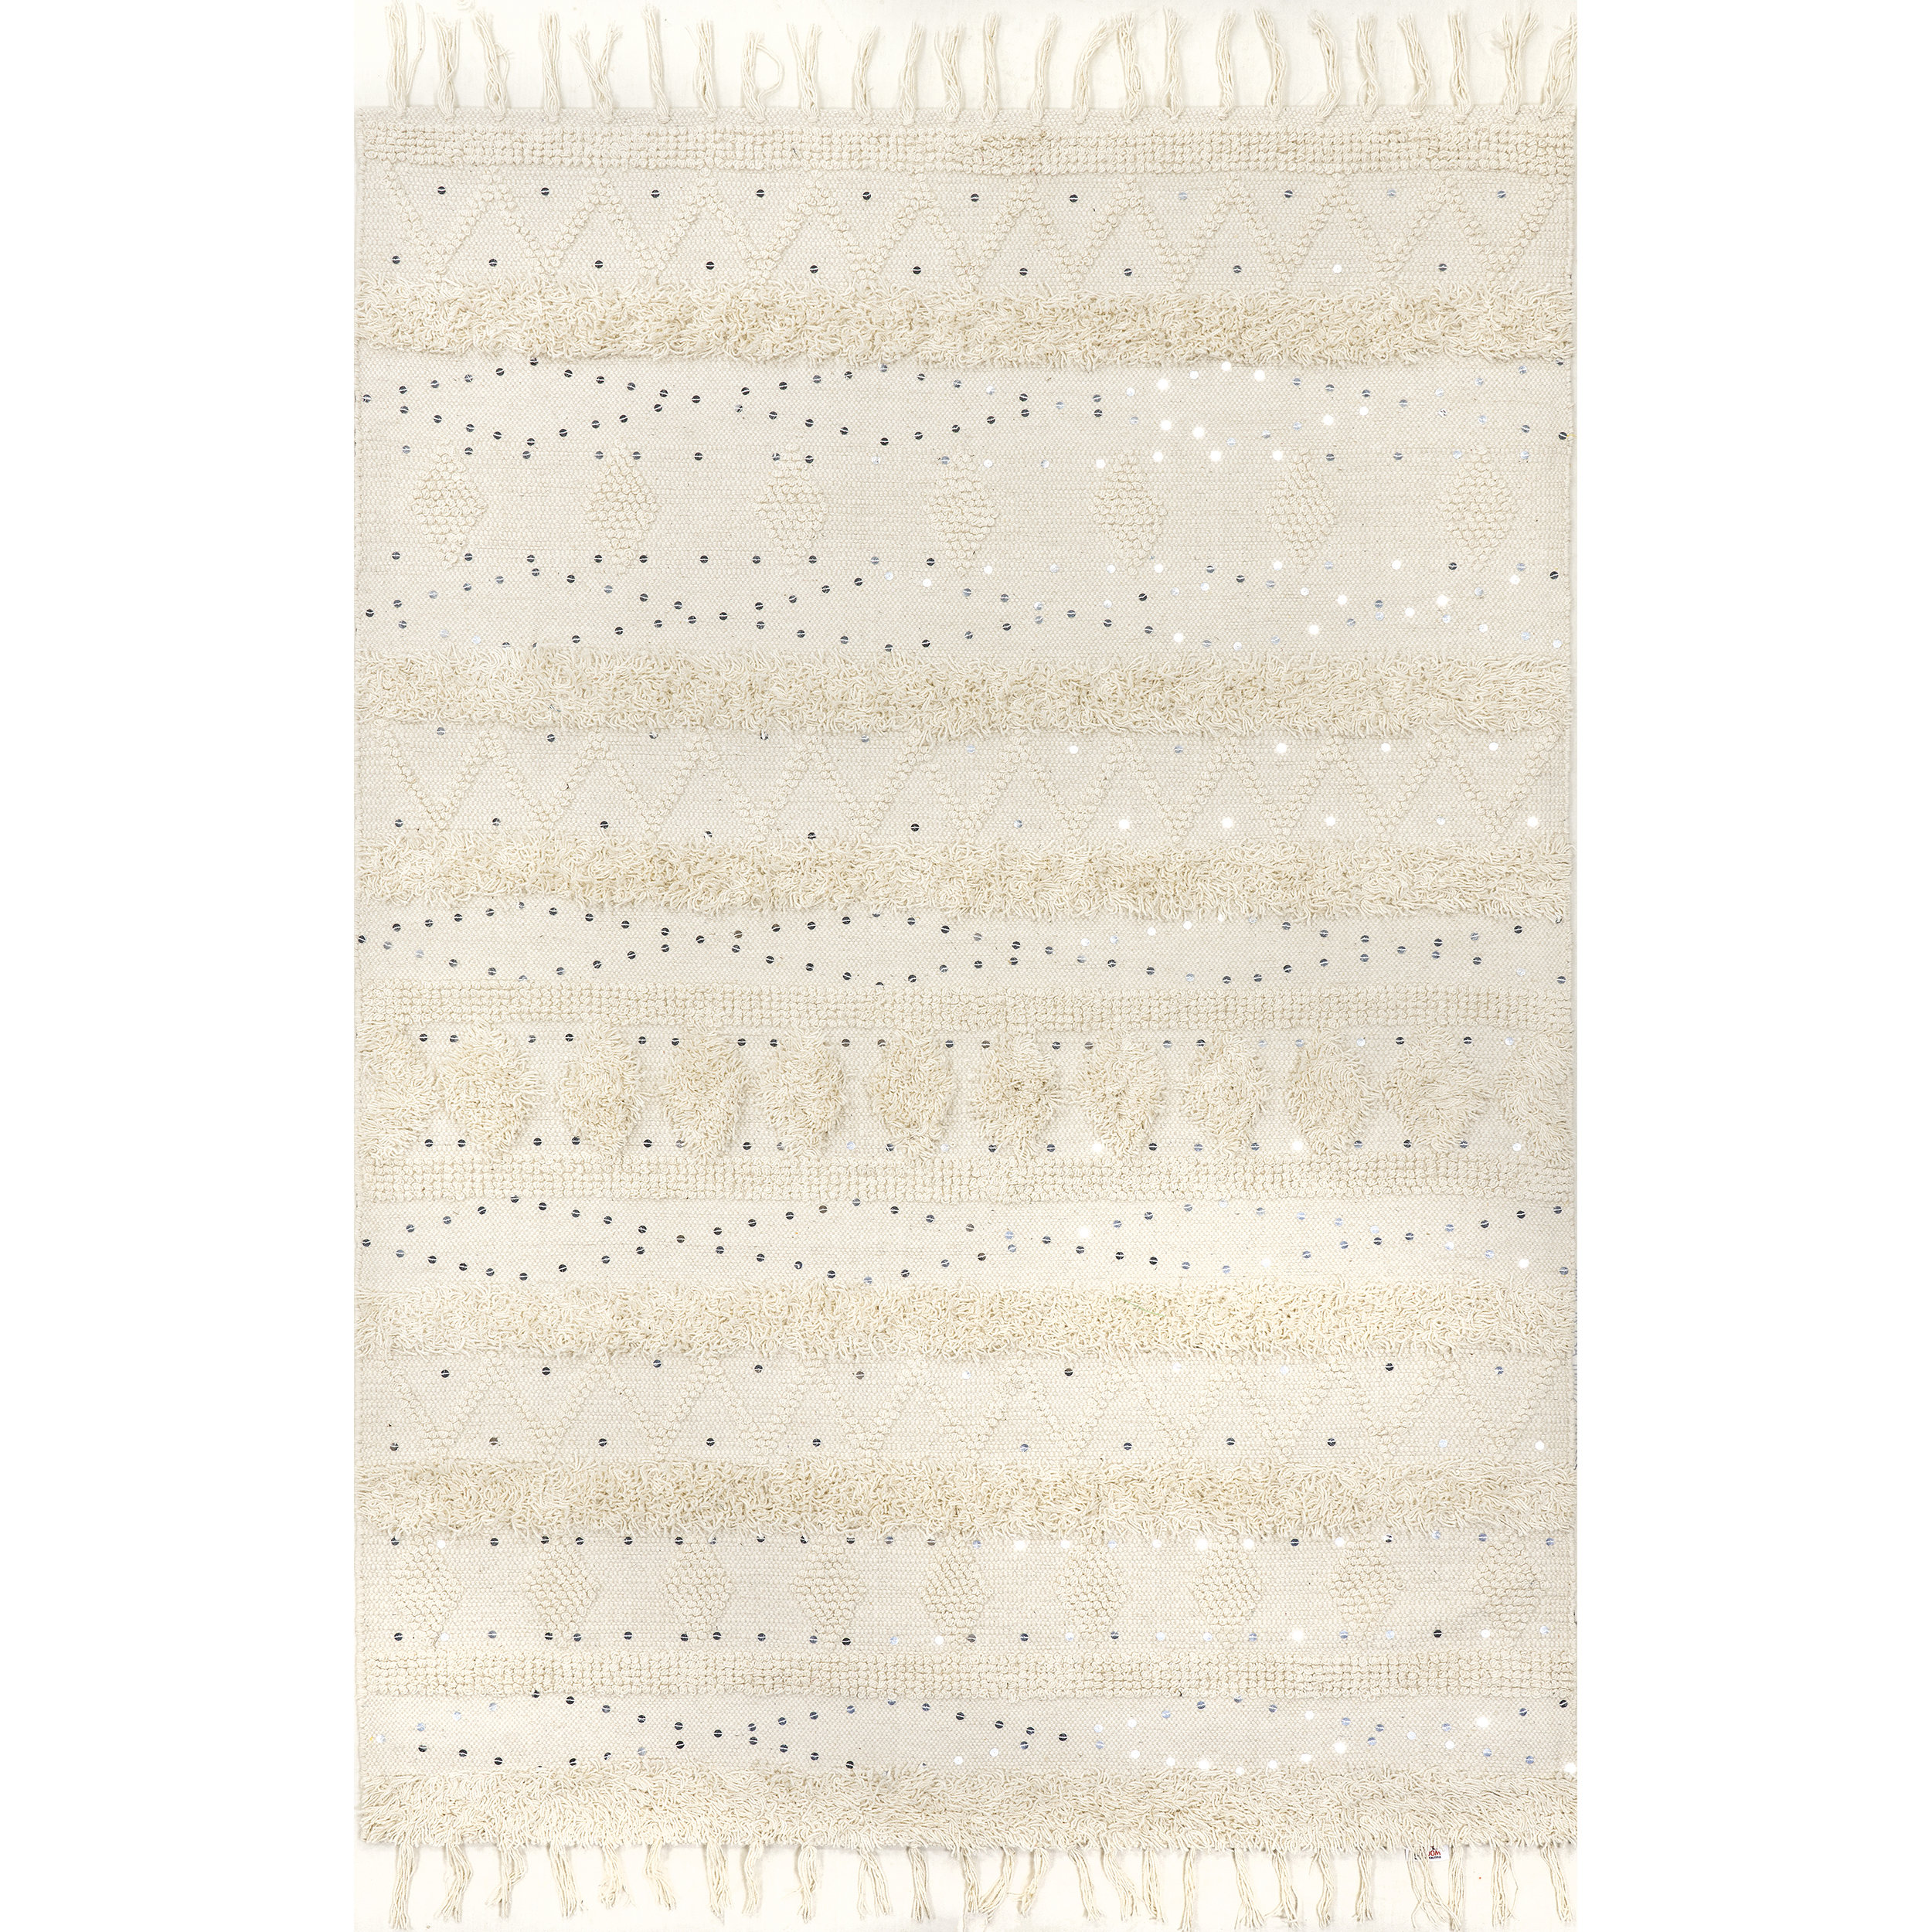 Arvin Olano x Rugs USA Chandy Textured Wool Ivory Area Rug